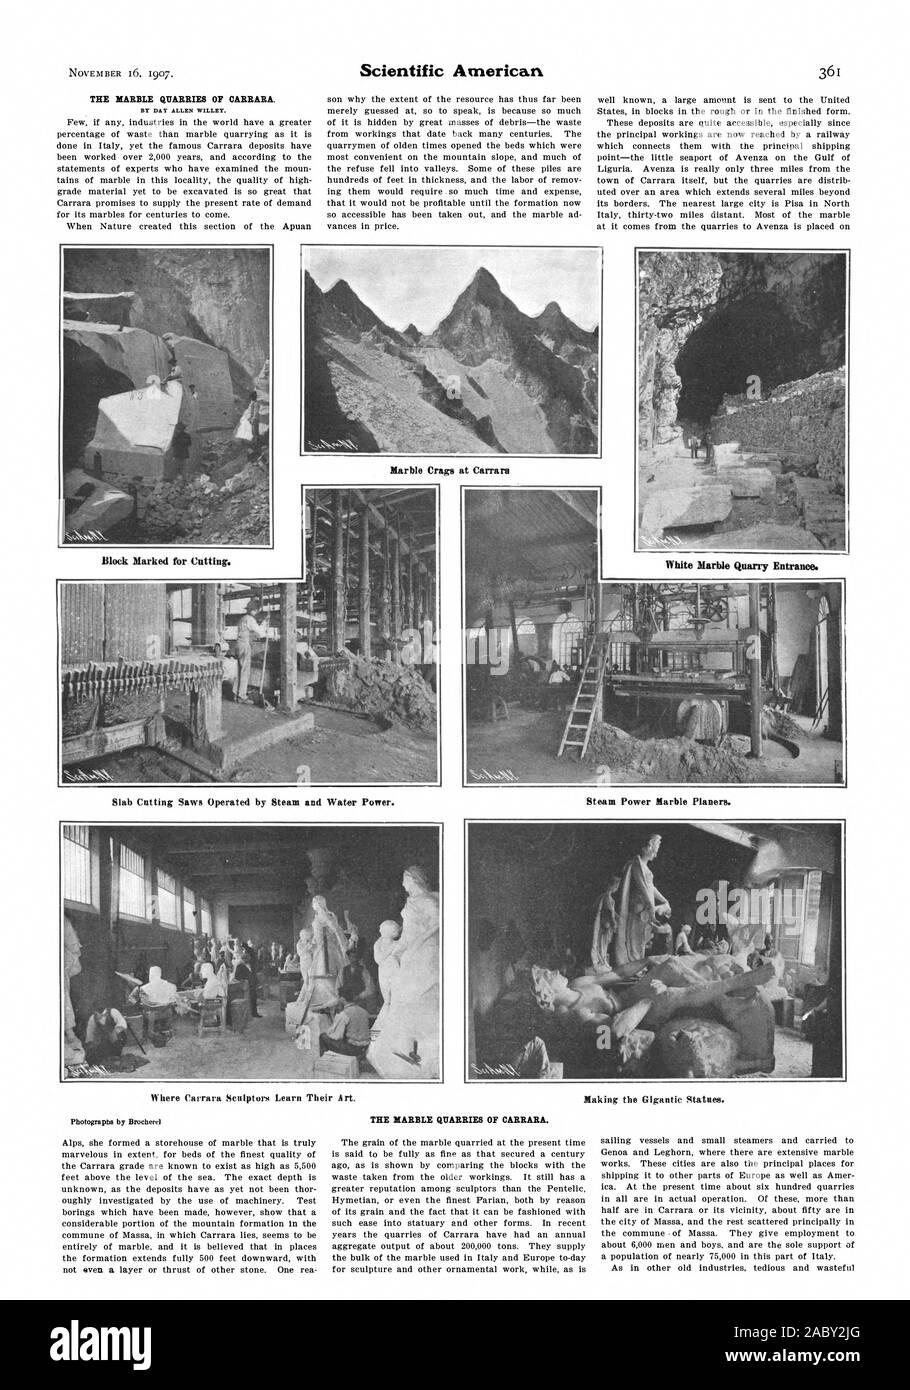 THE MARBLE QUARRIES OF CARRARA. BY DAY ALLEN WILLEY. Where Carrara Sculptors Learn Their Art. Making the Gigantic Statues. Block Marked for Cutting. White Marble Quarry Entrance. Steam Power Marble Planers. Slab Cutting Saws Operated by Steam and Water Power. Marble Crags at Carrara Alps she formed a storehouse of marble that is truly marvelous in extent for beds of the finest quality of the Carrara grade are known to exist as high as 5500 feet above the level of the sea. The exact depth is unknown as the deposits have as yet not been thor oughly investigated by the use of machinery. Test Stock Photo